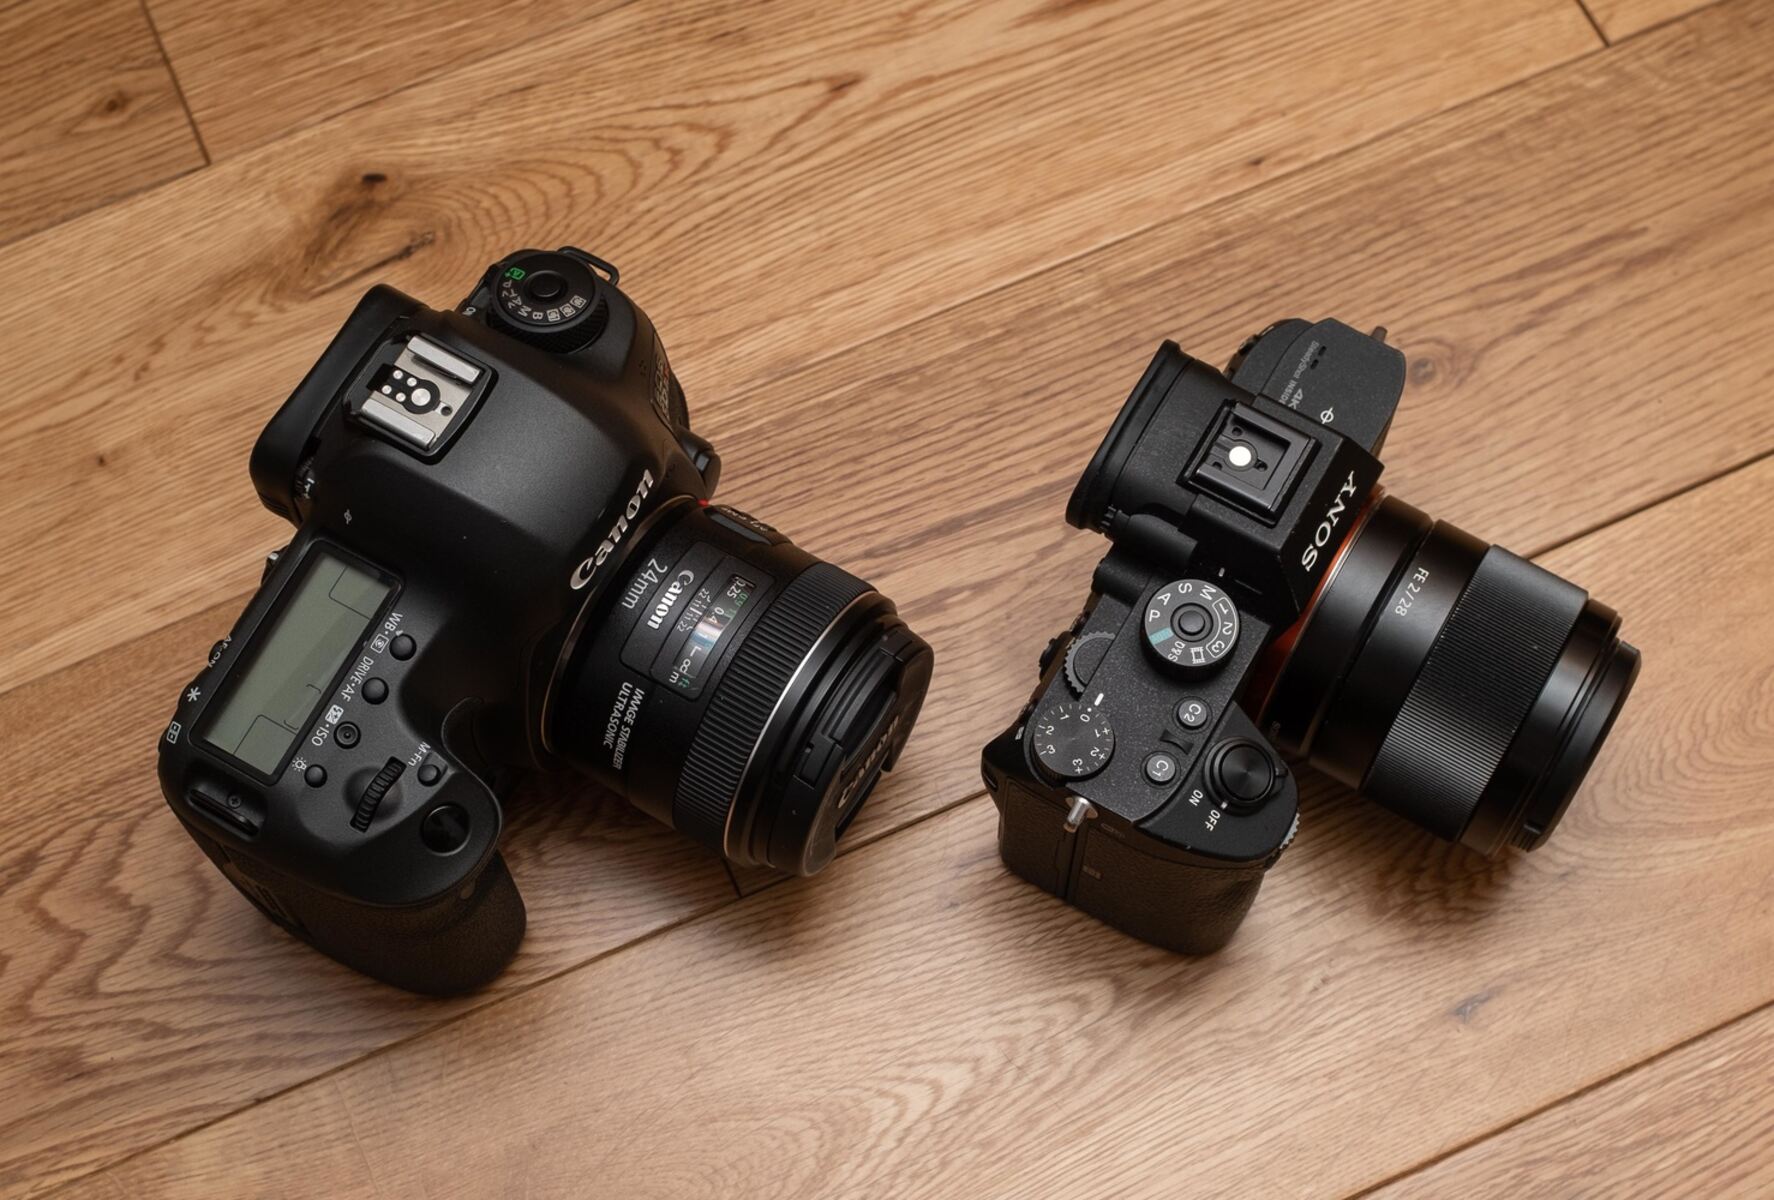 What Is The Advantage Of A Mirrorless Camera?